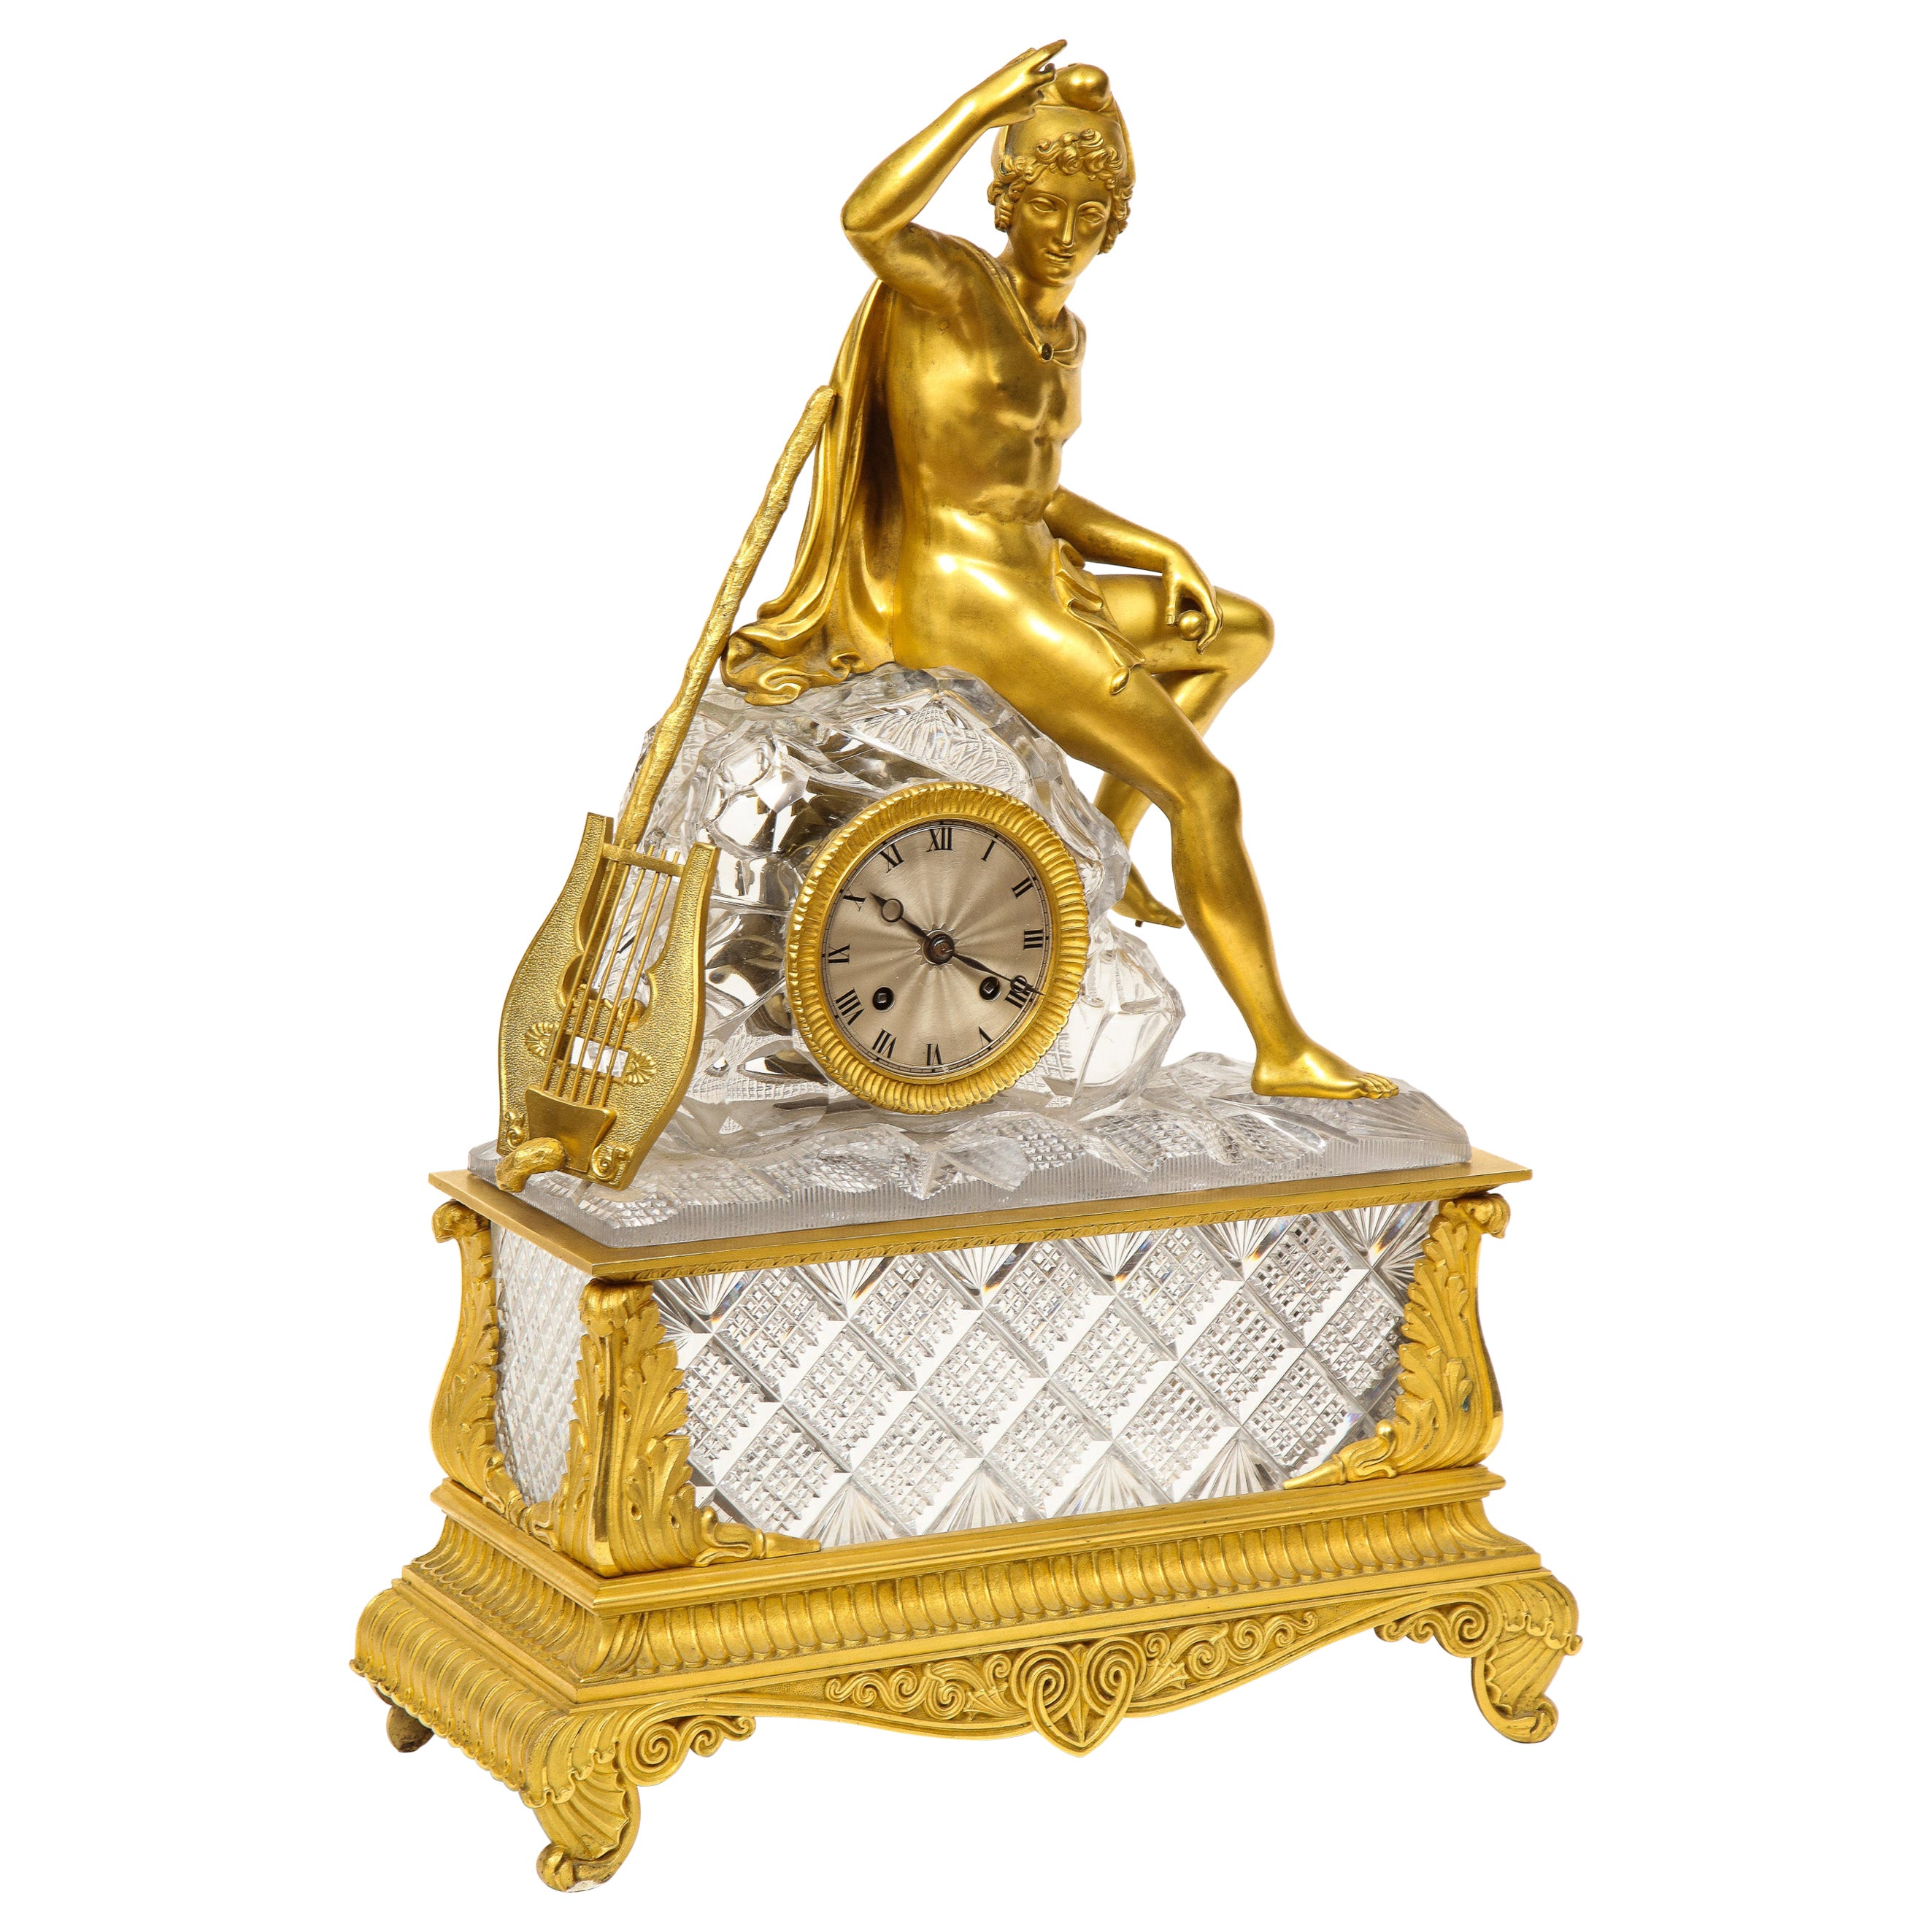 Exquisite French Empire Ormolu and Cut-Crystal Clock, c. 1815